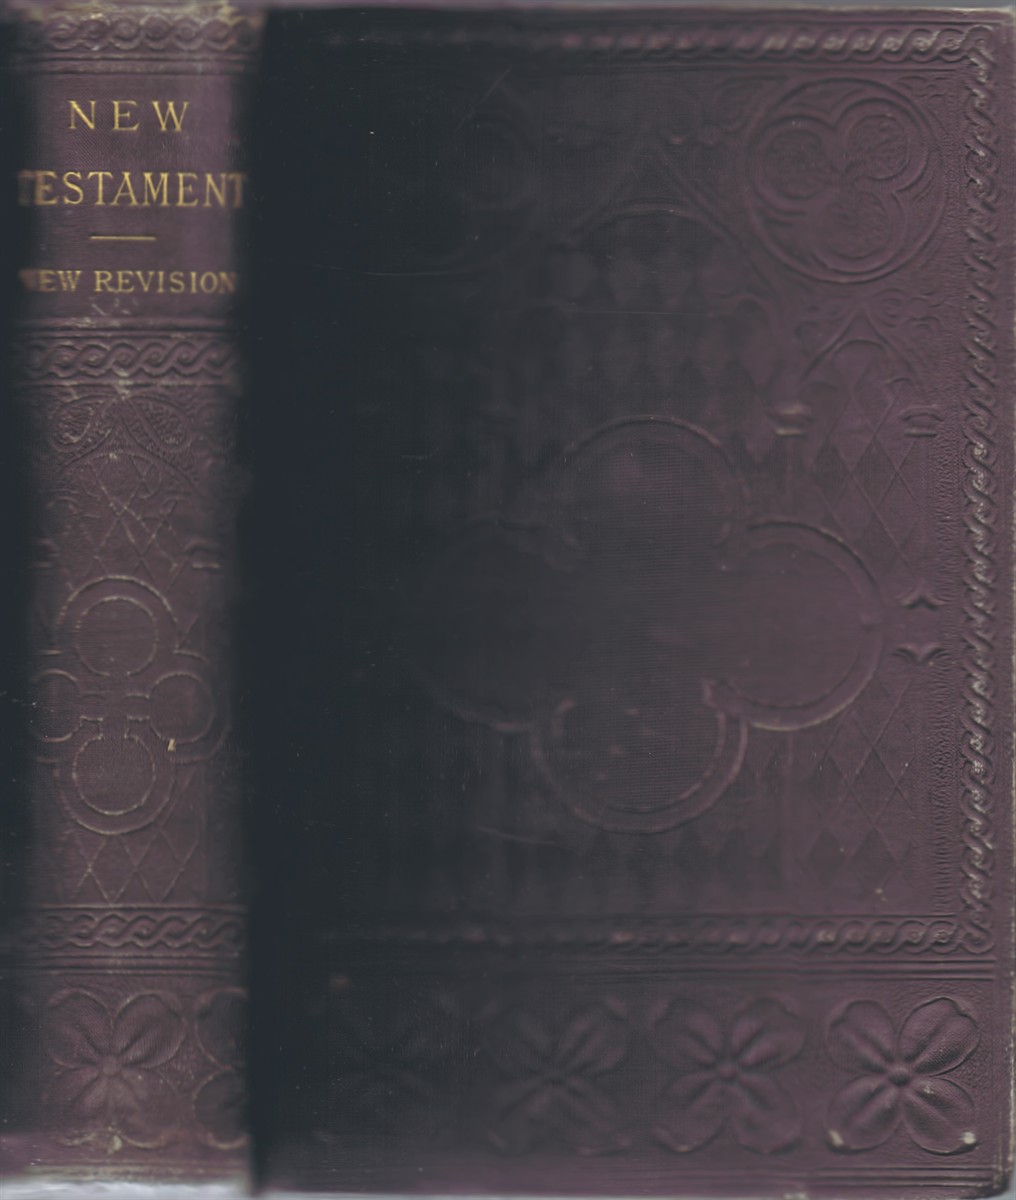 BIBLE - The New Testament of Our Lord and Saviour Jesus Christ, Translated out of the Greek: Being the Version Set Forth A.D. 1611 Compared with the Most Ancient Authorities, and Revised A.D. 1881